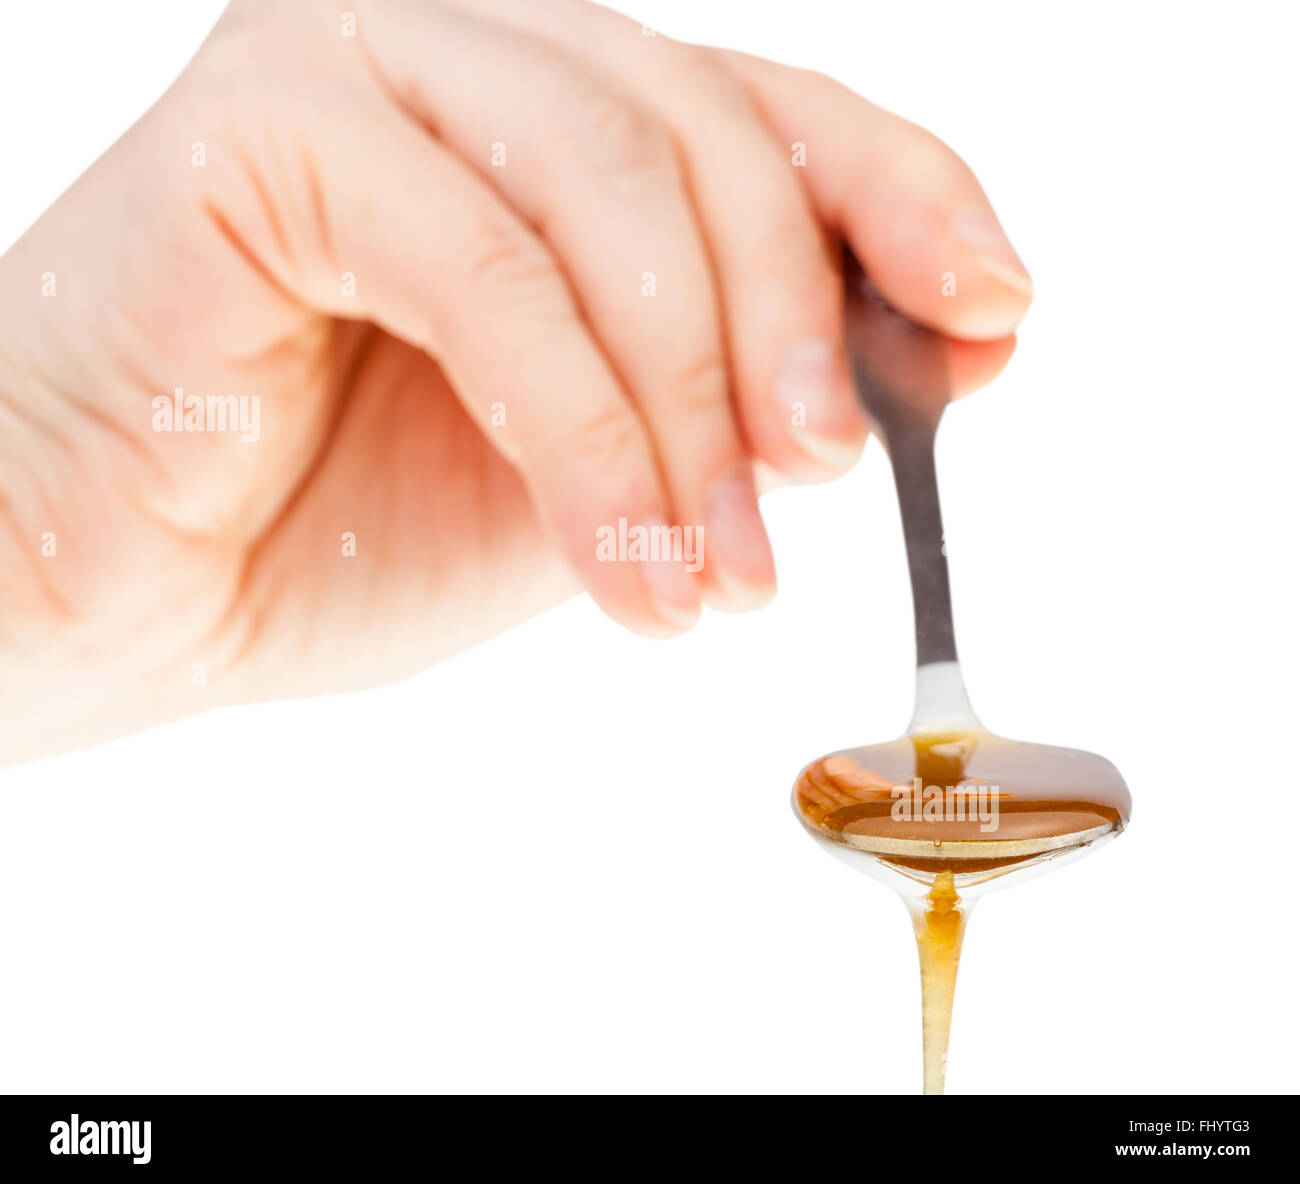 direct view of hand holds metal spoon with clear honey close up isolated on white background Stock Photo